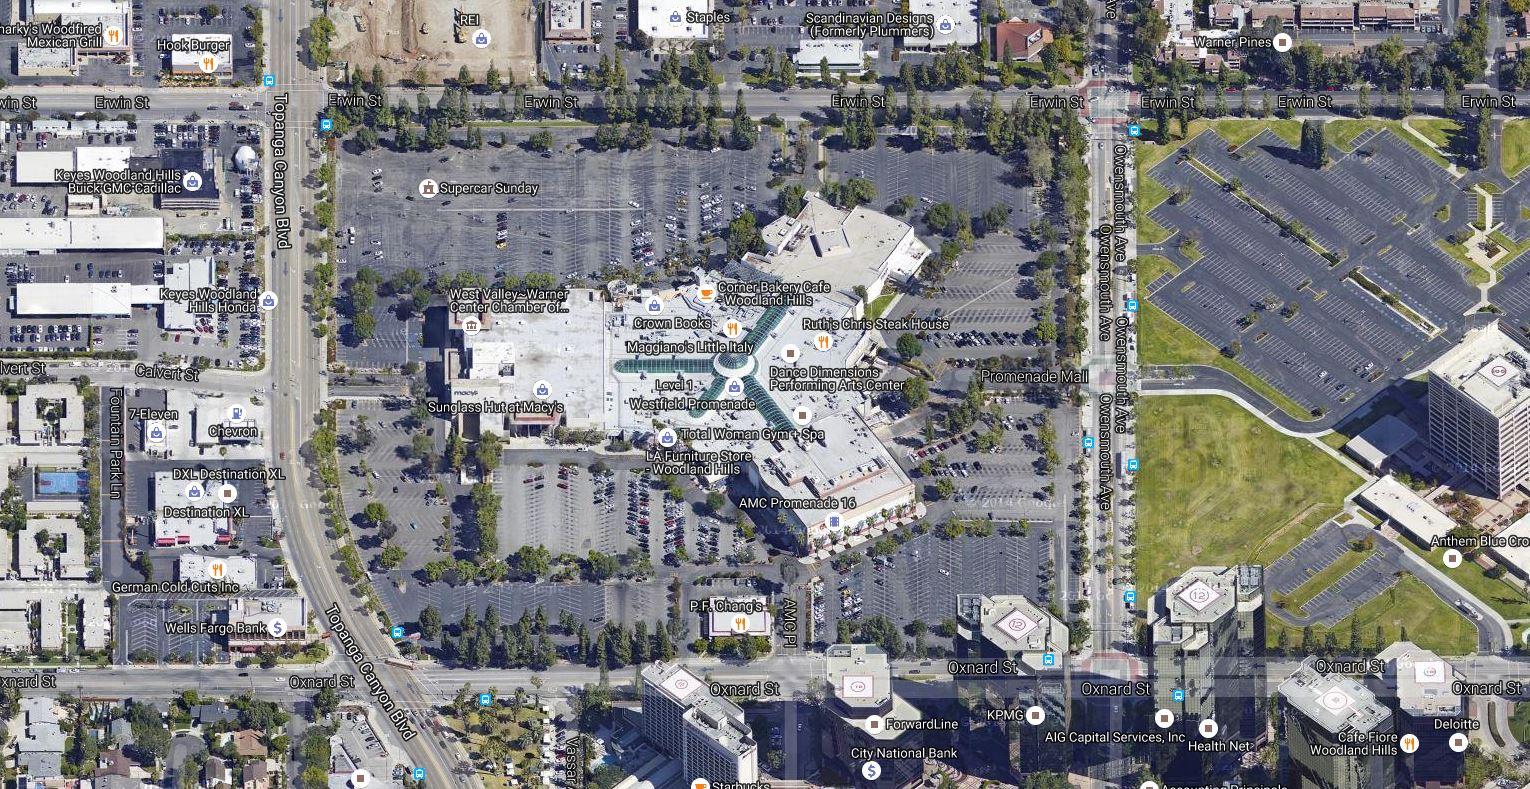 LA City Council approves new Westfield mall in Woodland Hills after 7 years